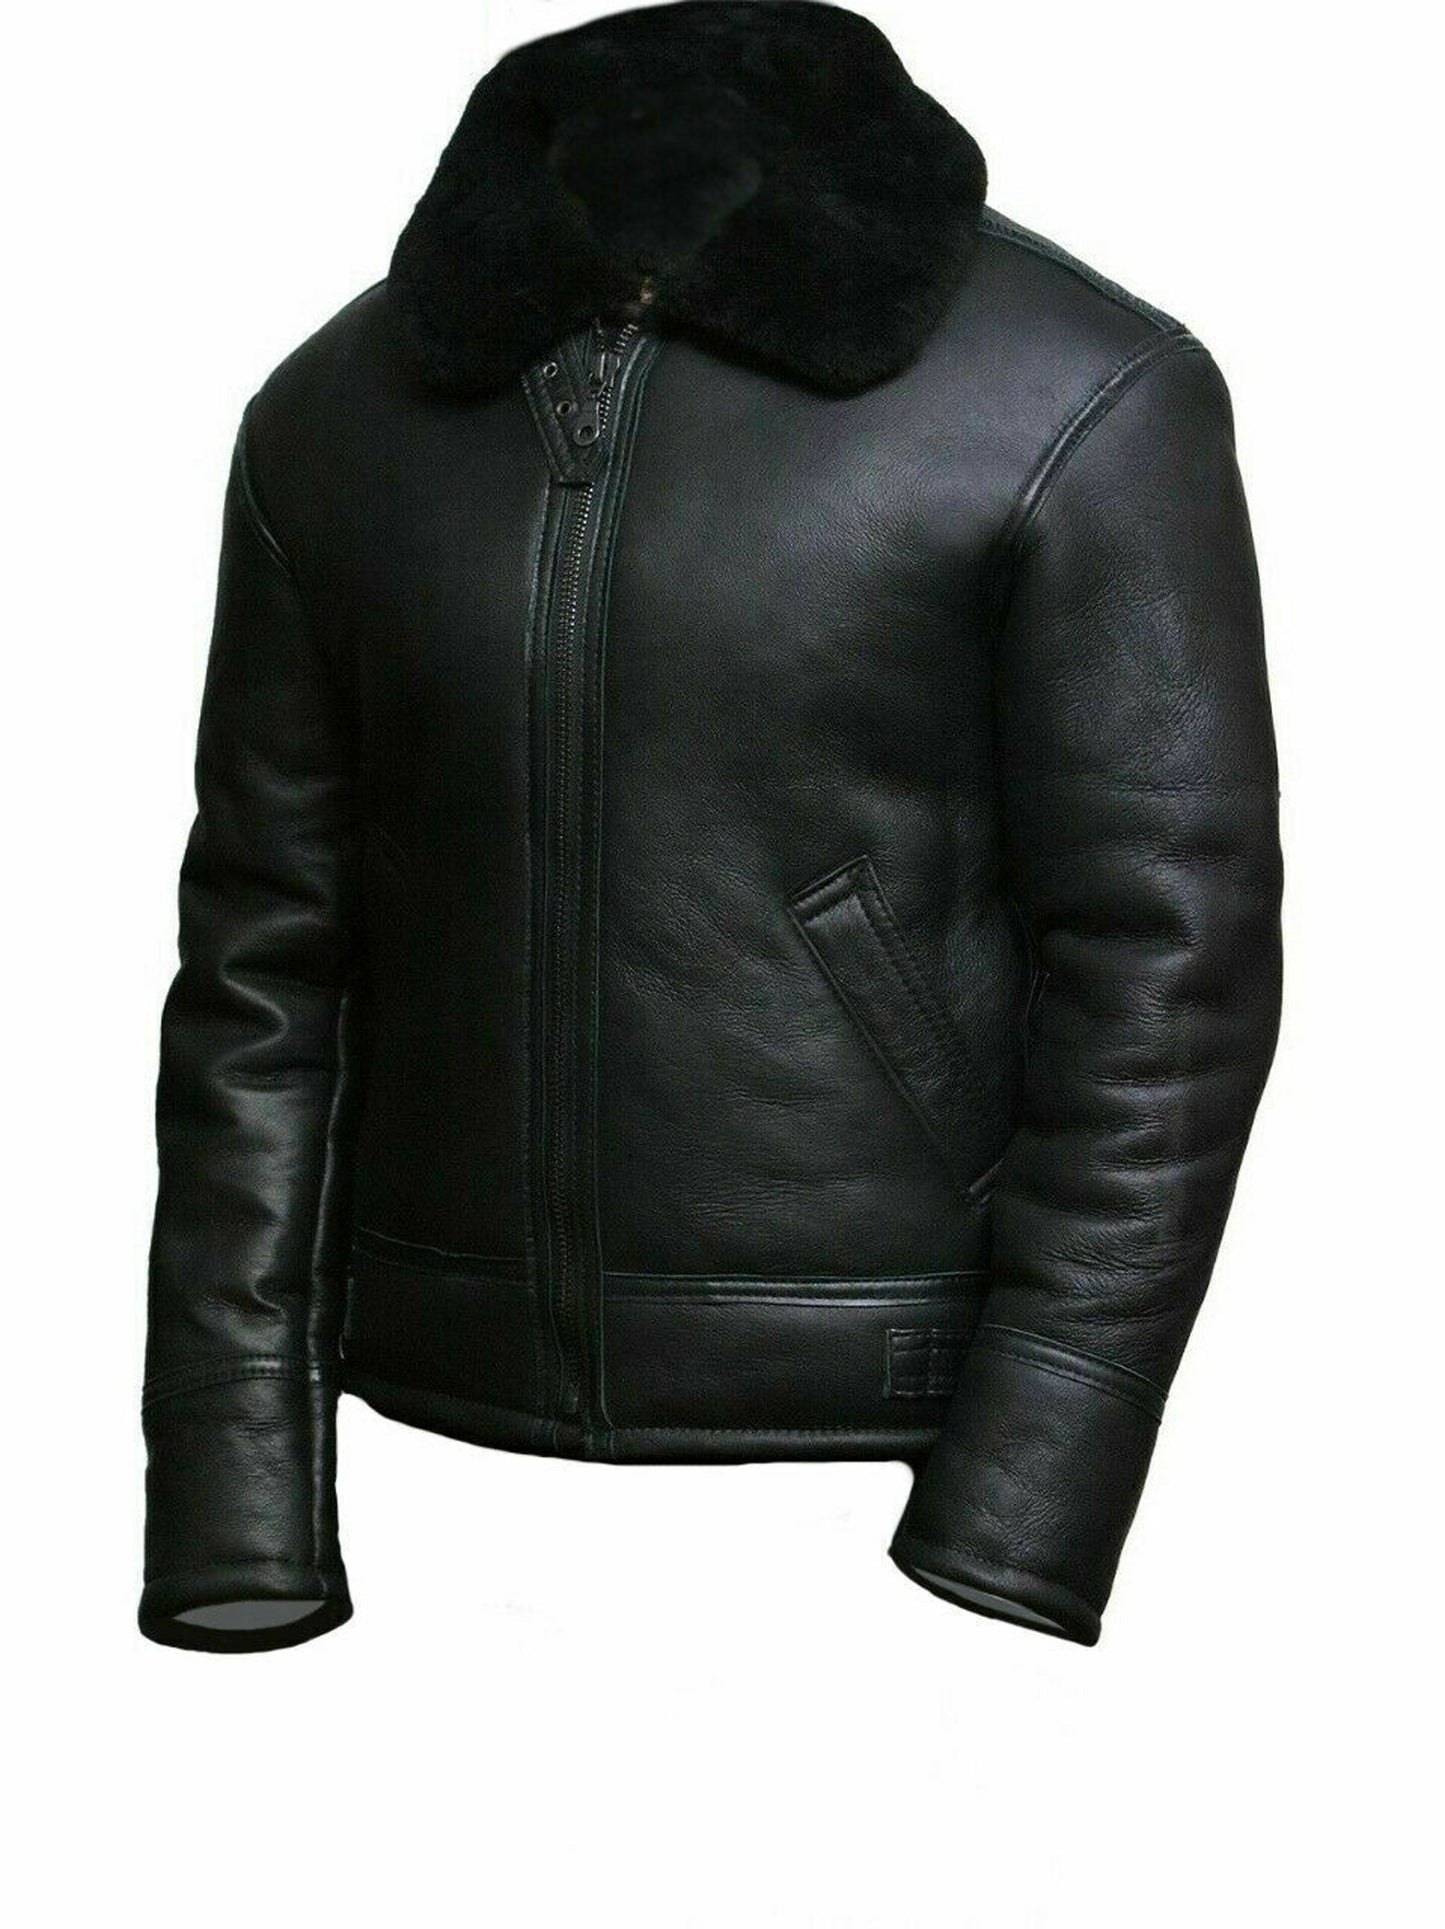 JAMES BUSH Payment for 1 Jacket and Order for New XL Black Shearling Coat